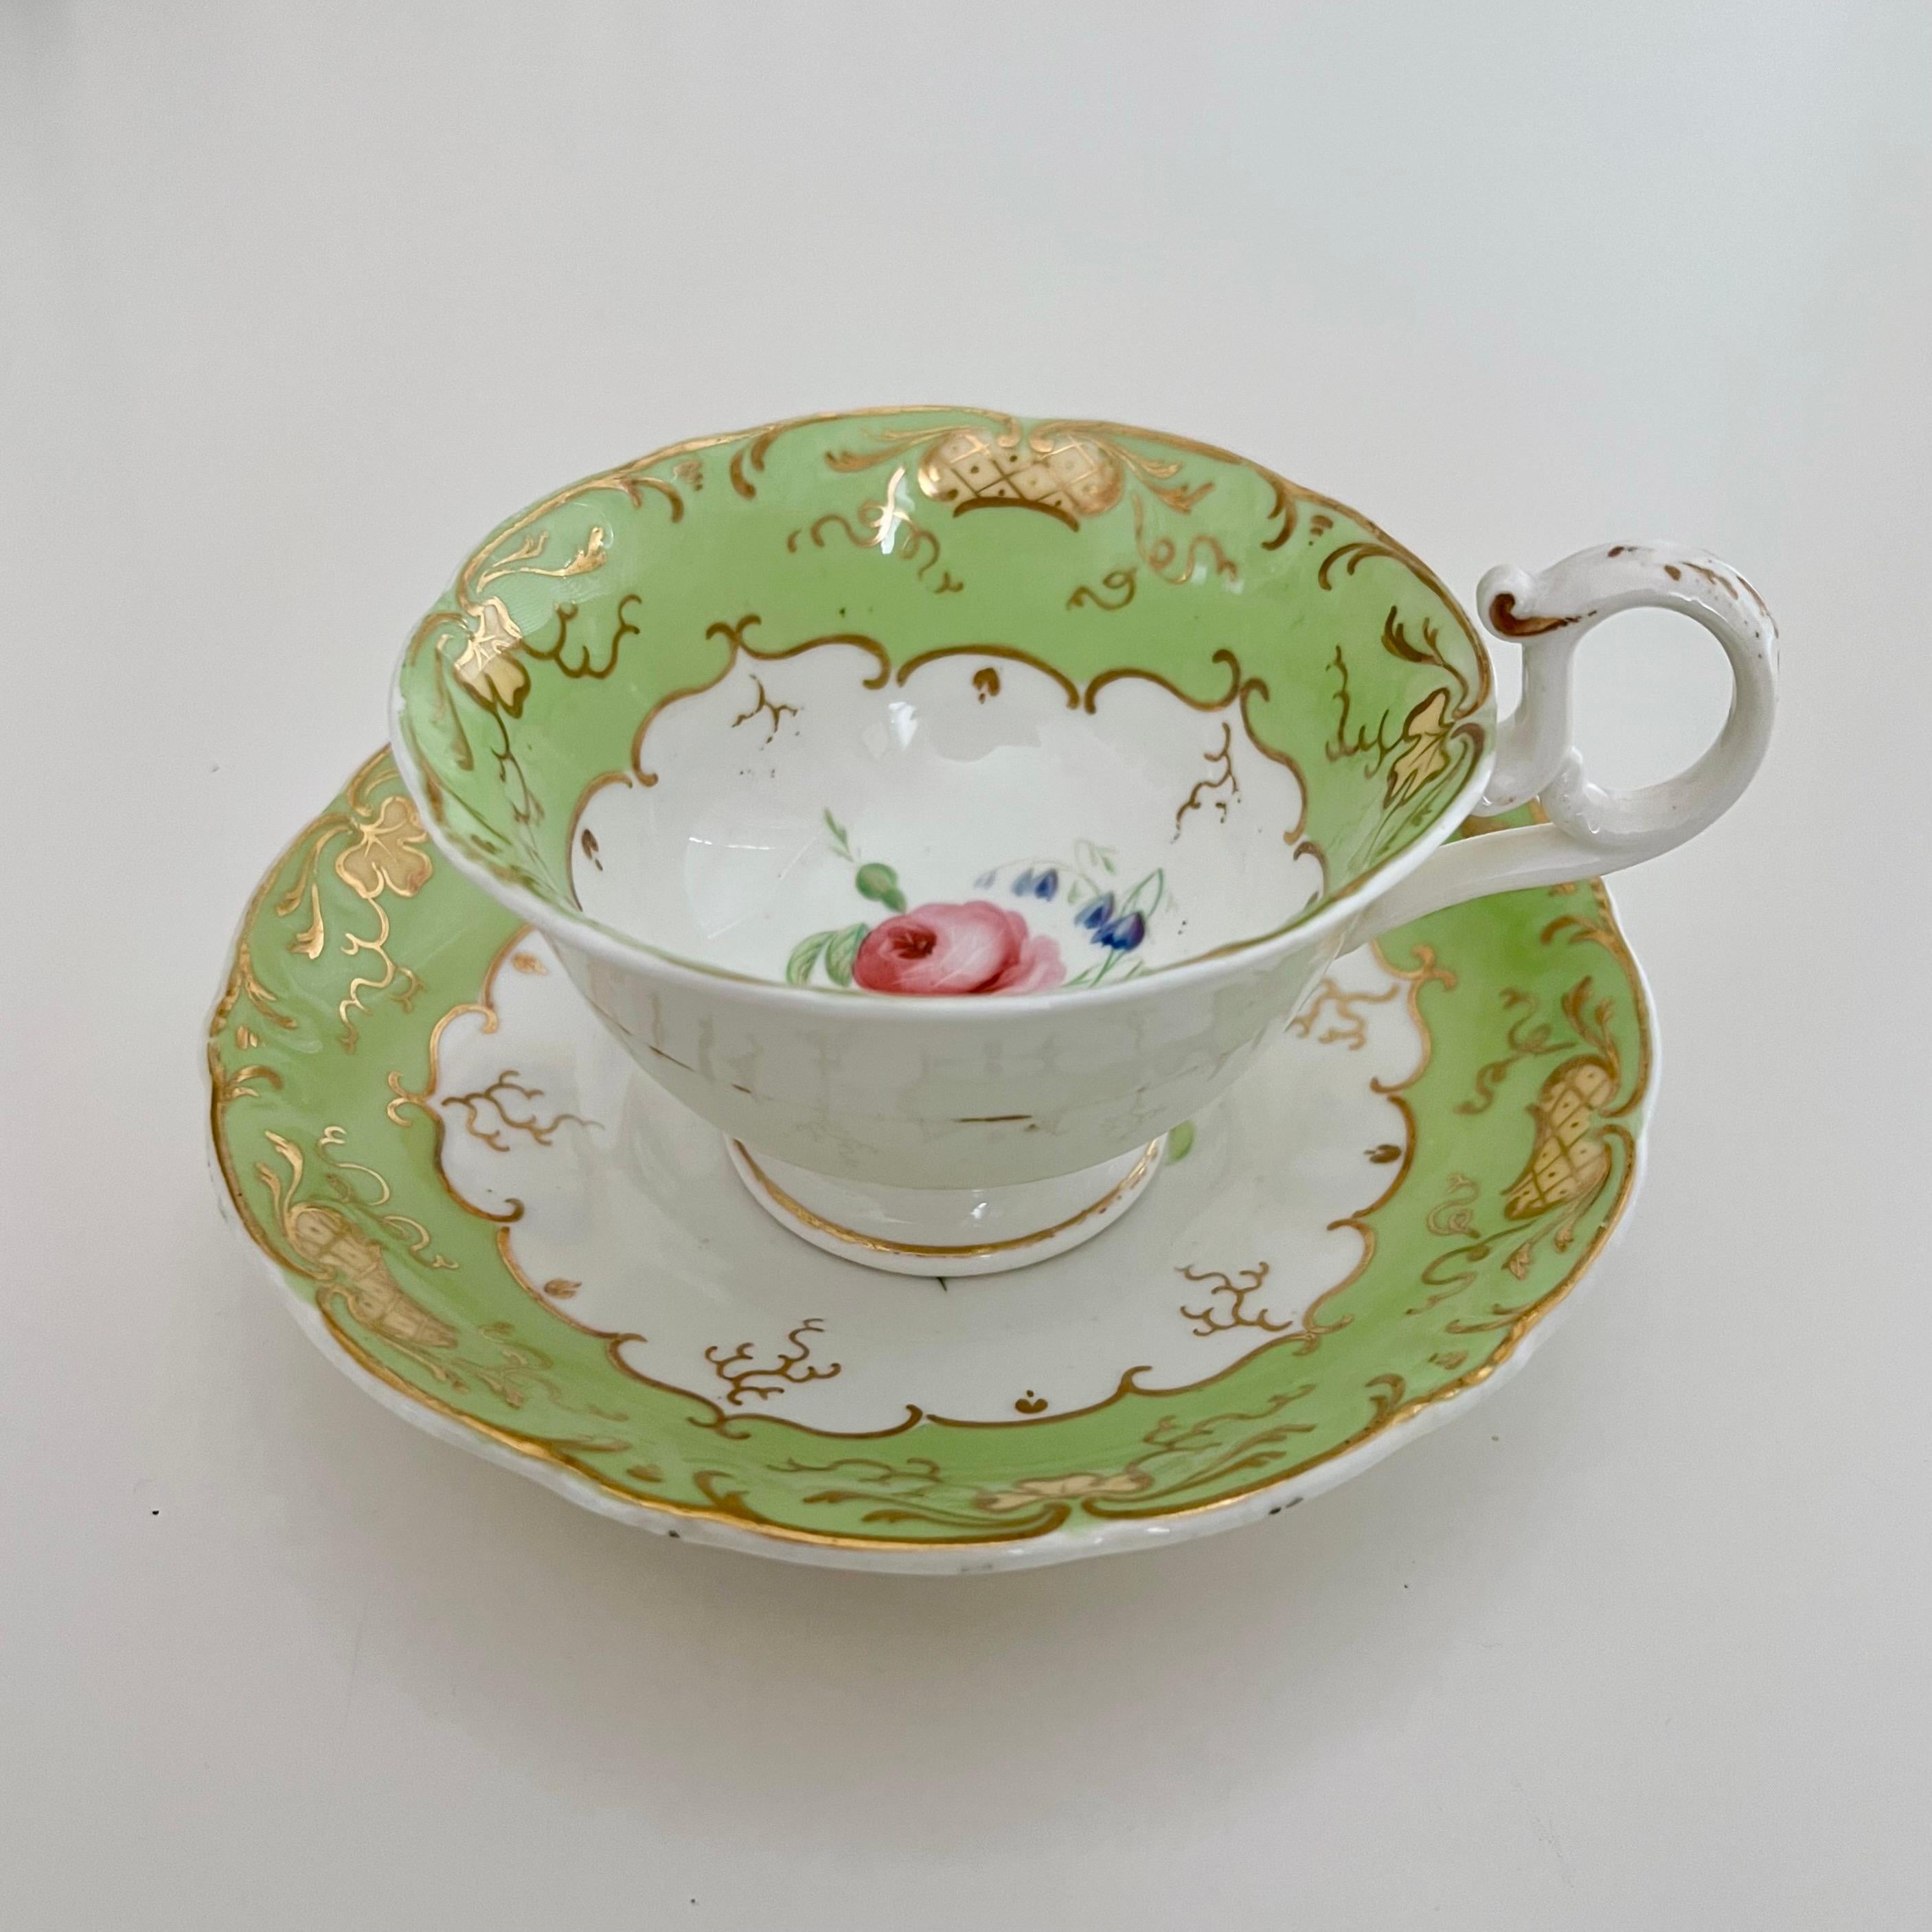 English H & R Daniel Porcelain Teacup, Apple Green with Pink Roses, Rococo Revival C1840